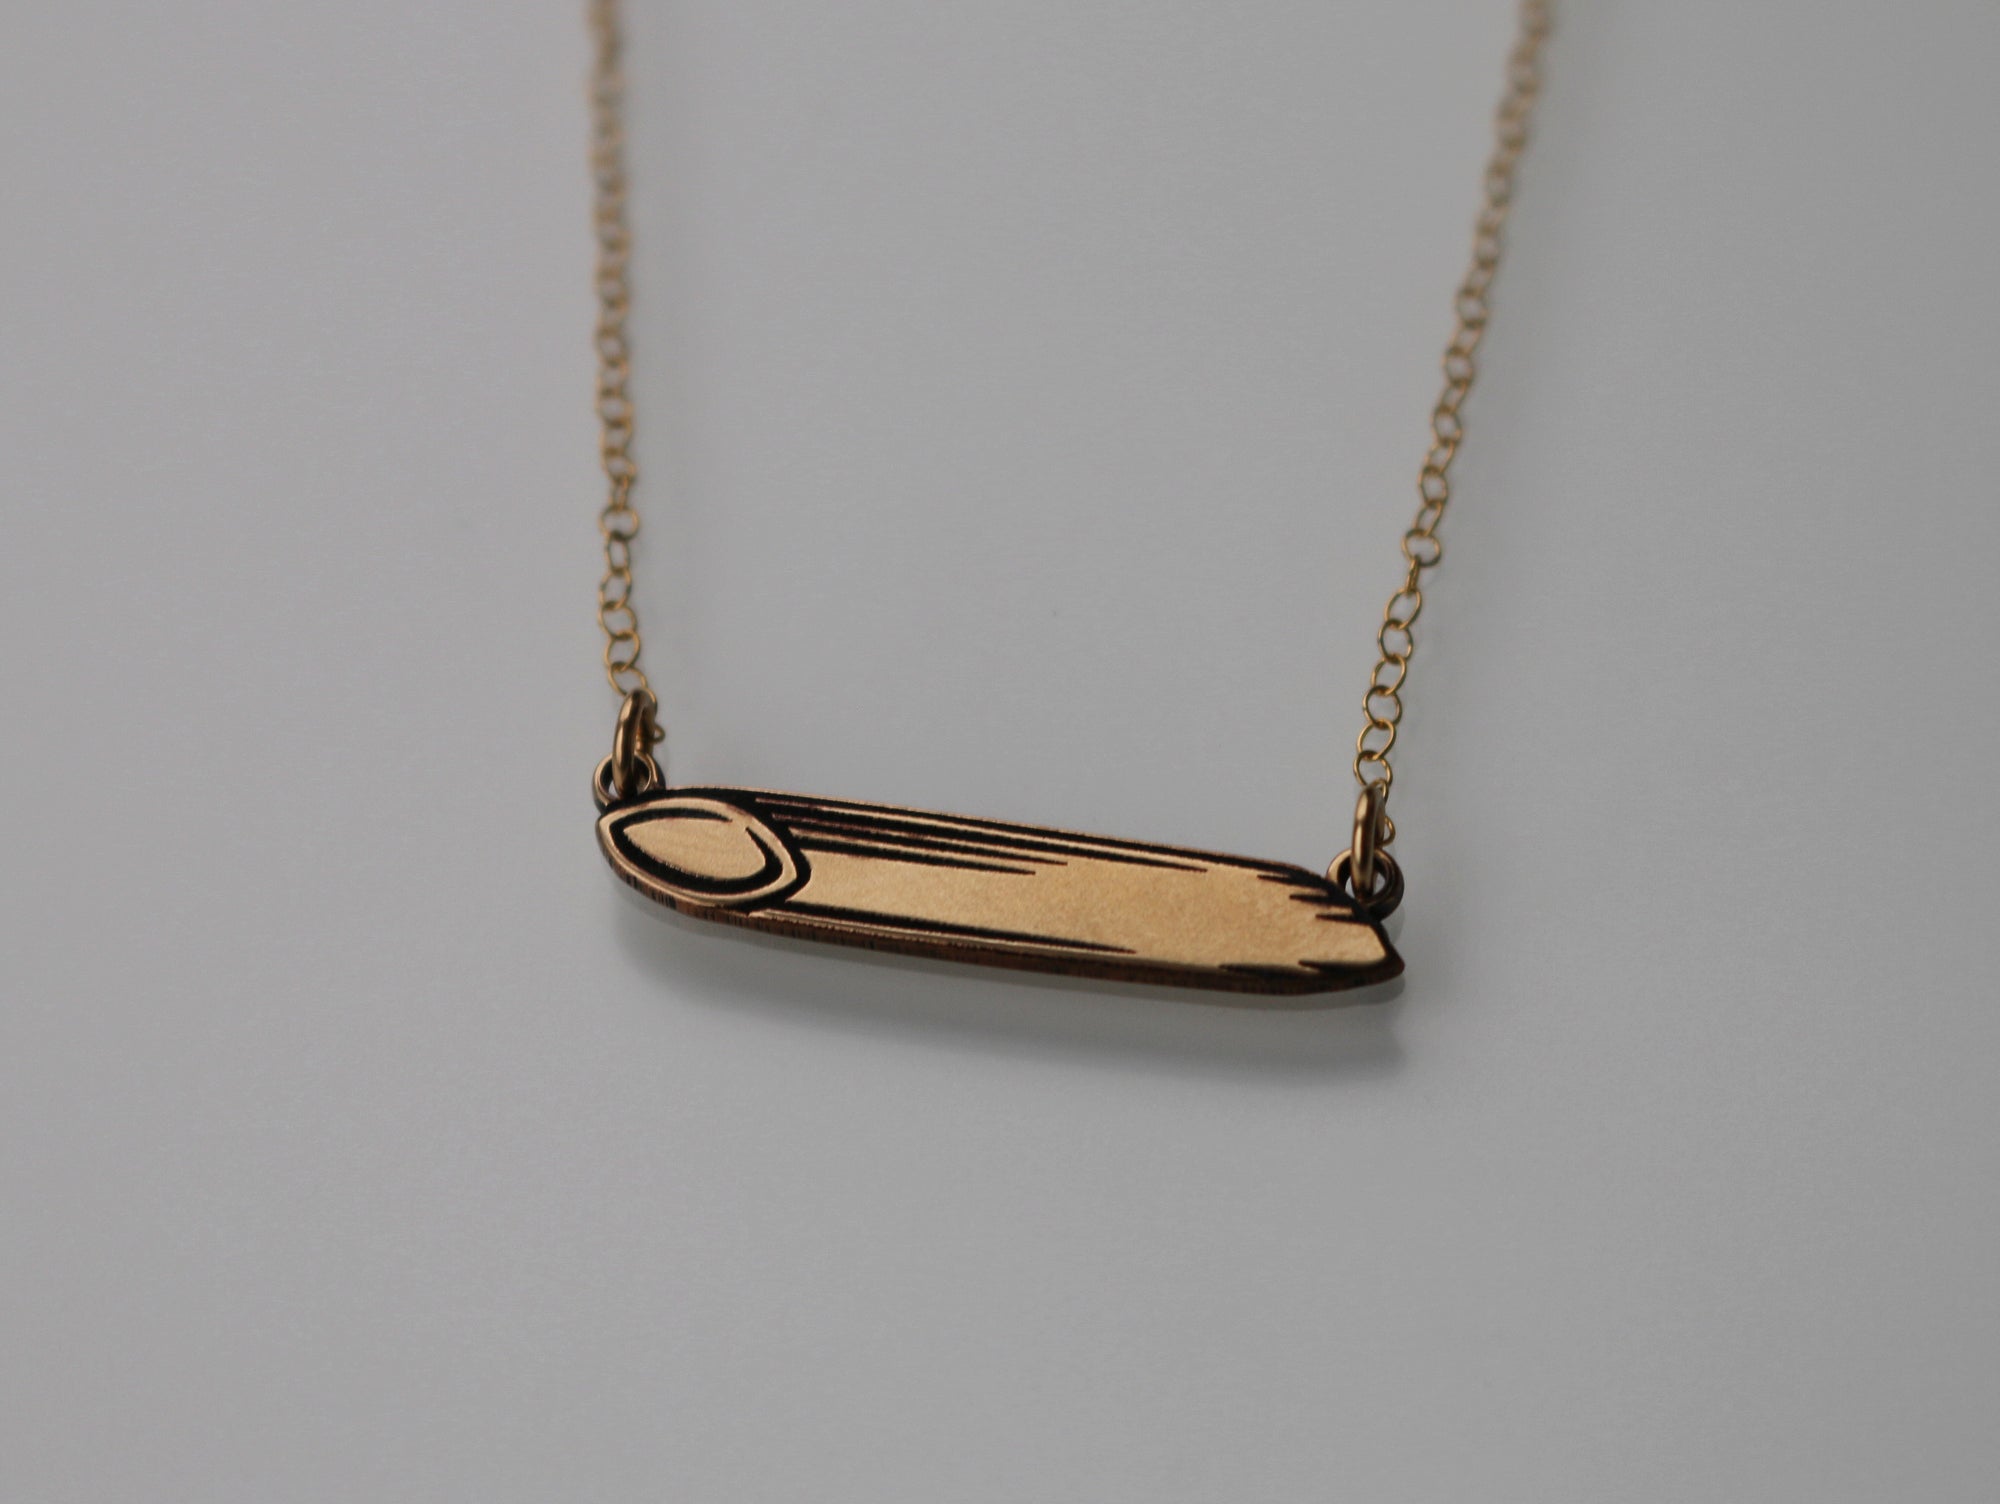 Penne Pasta Necklace - Gold Filled